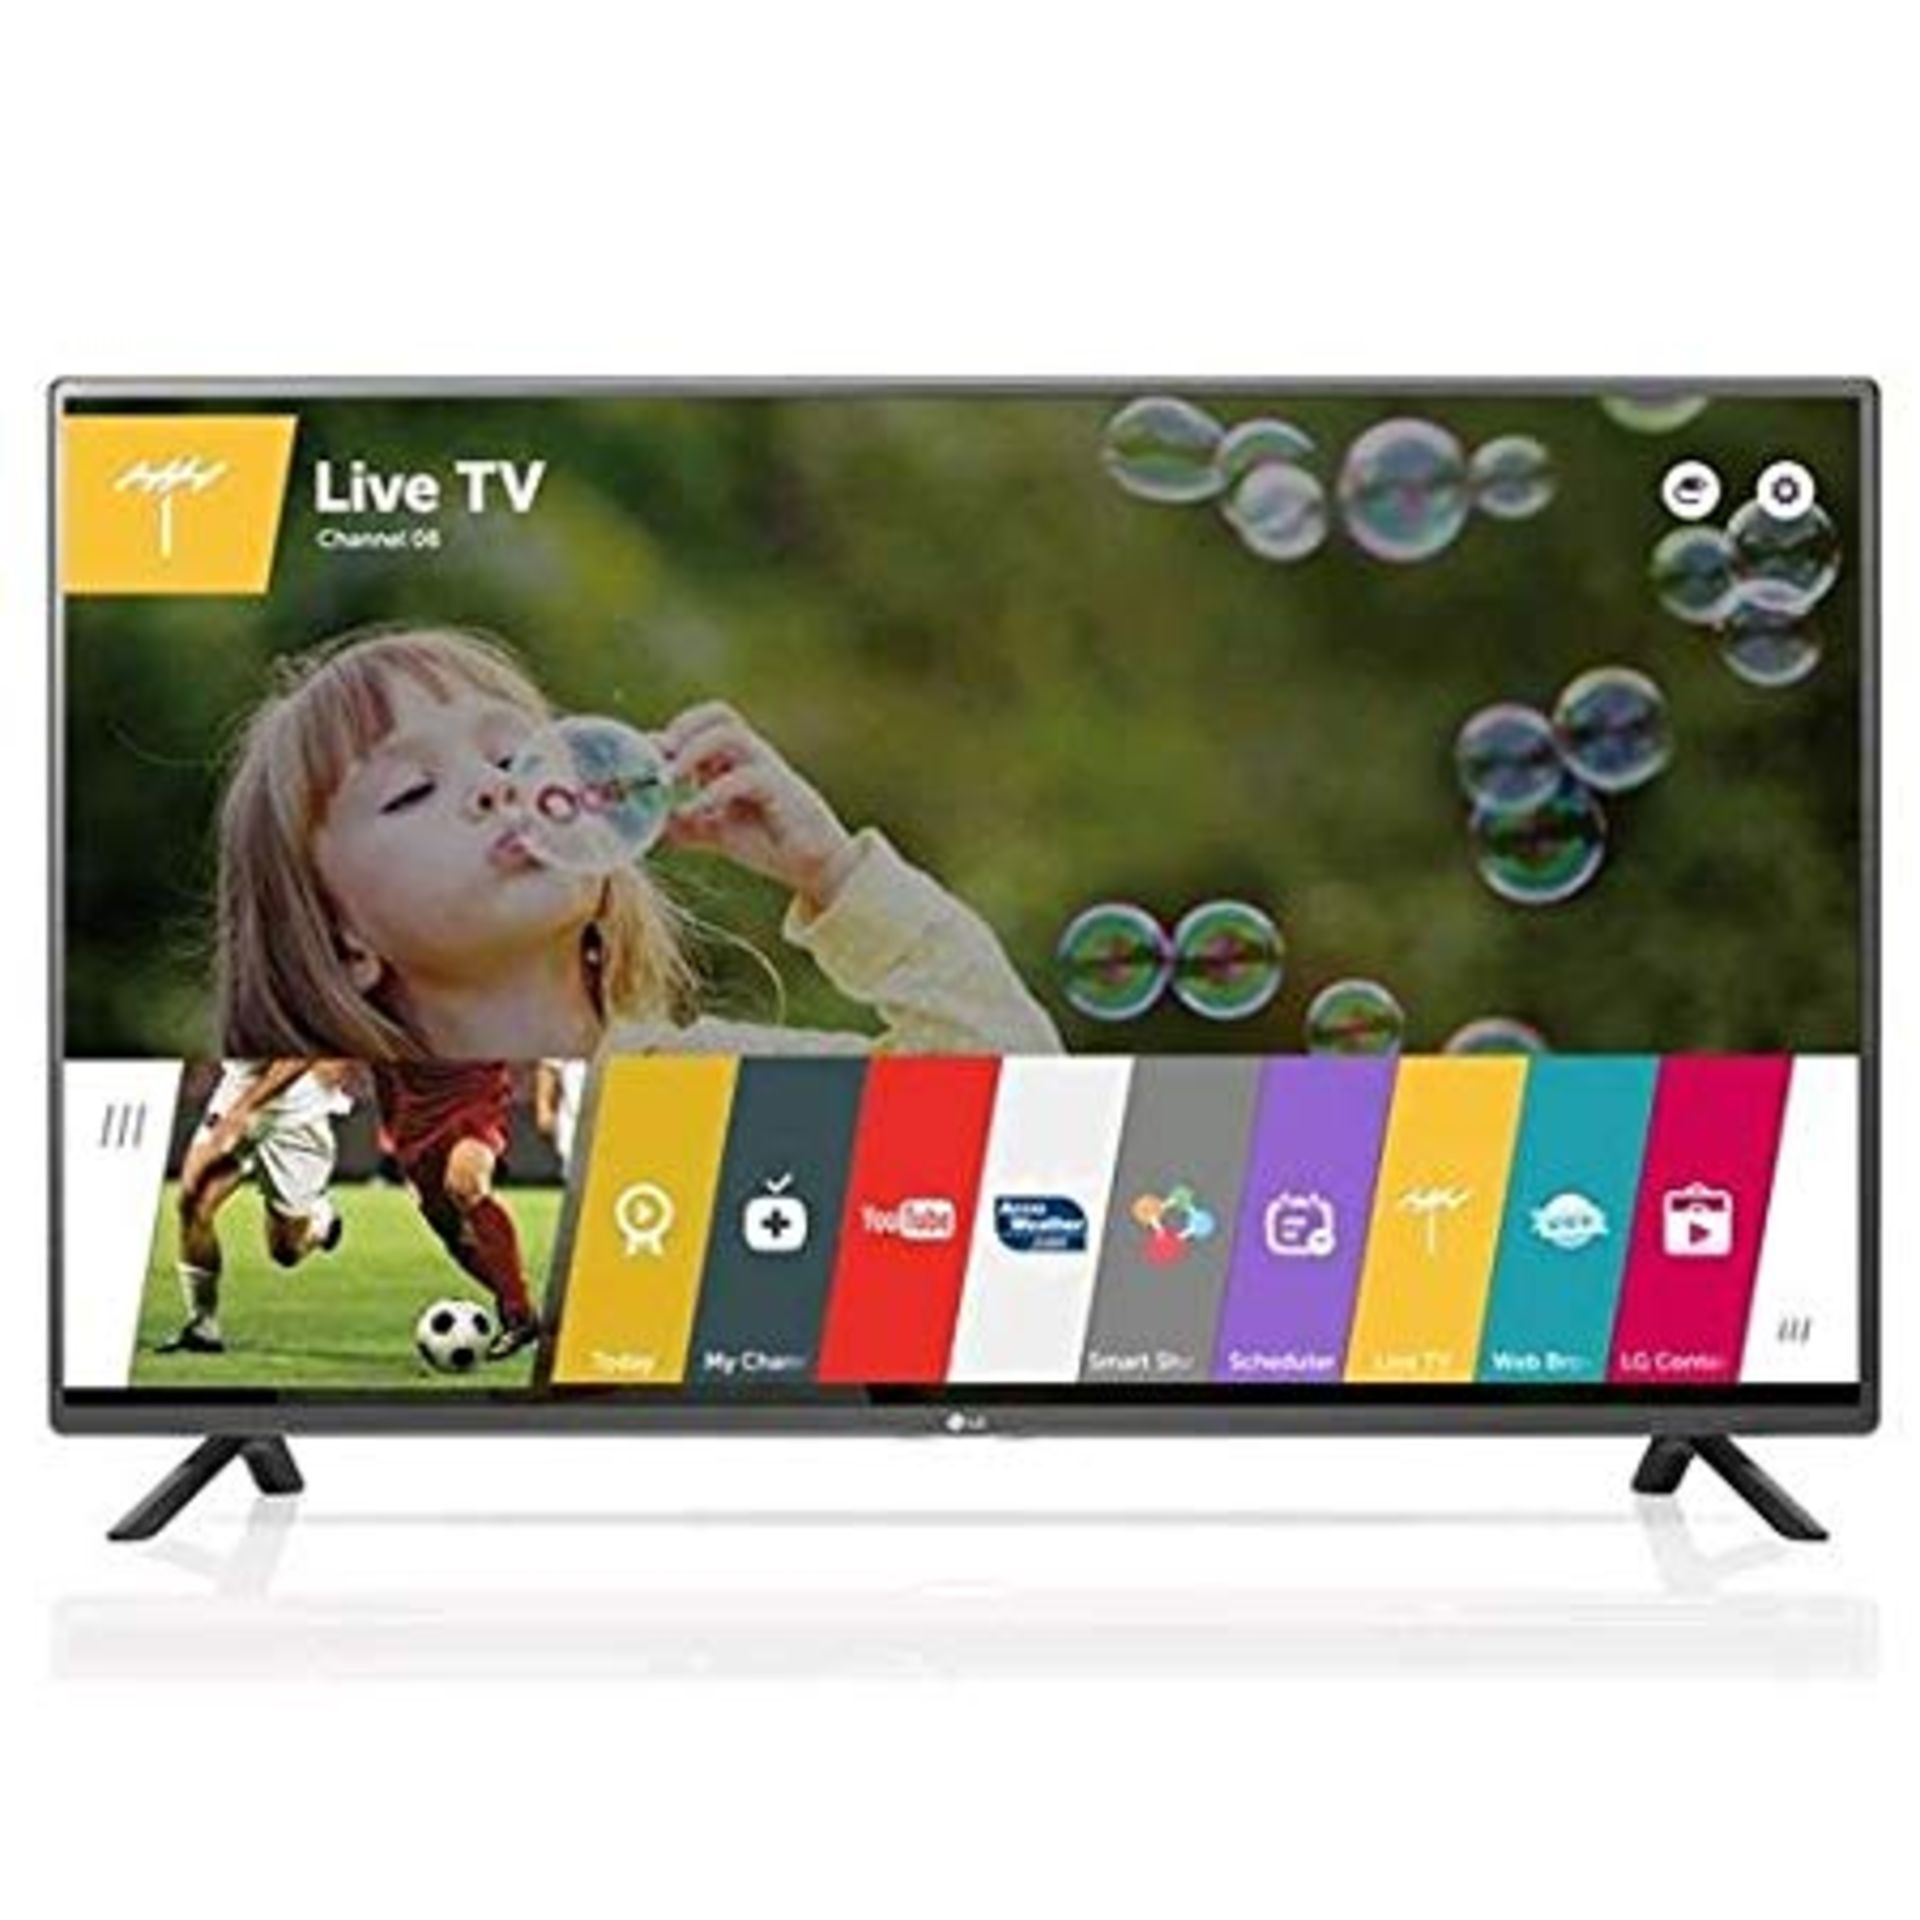 V Grade A LG 55 Inch FULL HD LED SMART TV WITH FREEVIEW HD, WIFI - WHITE 55LF592V